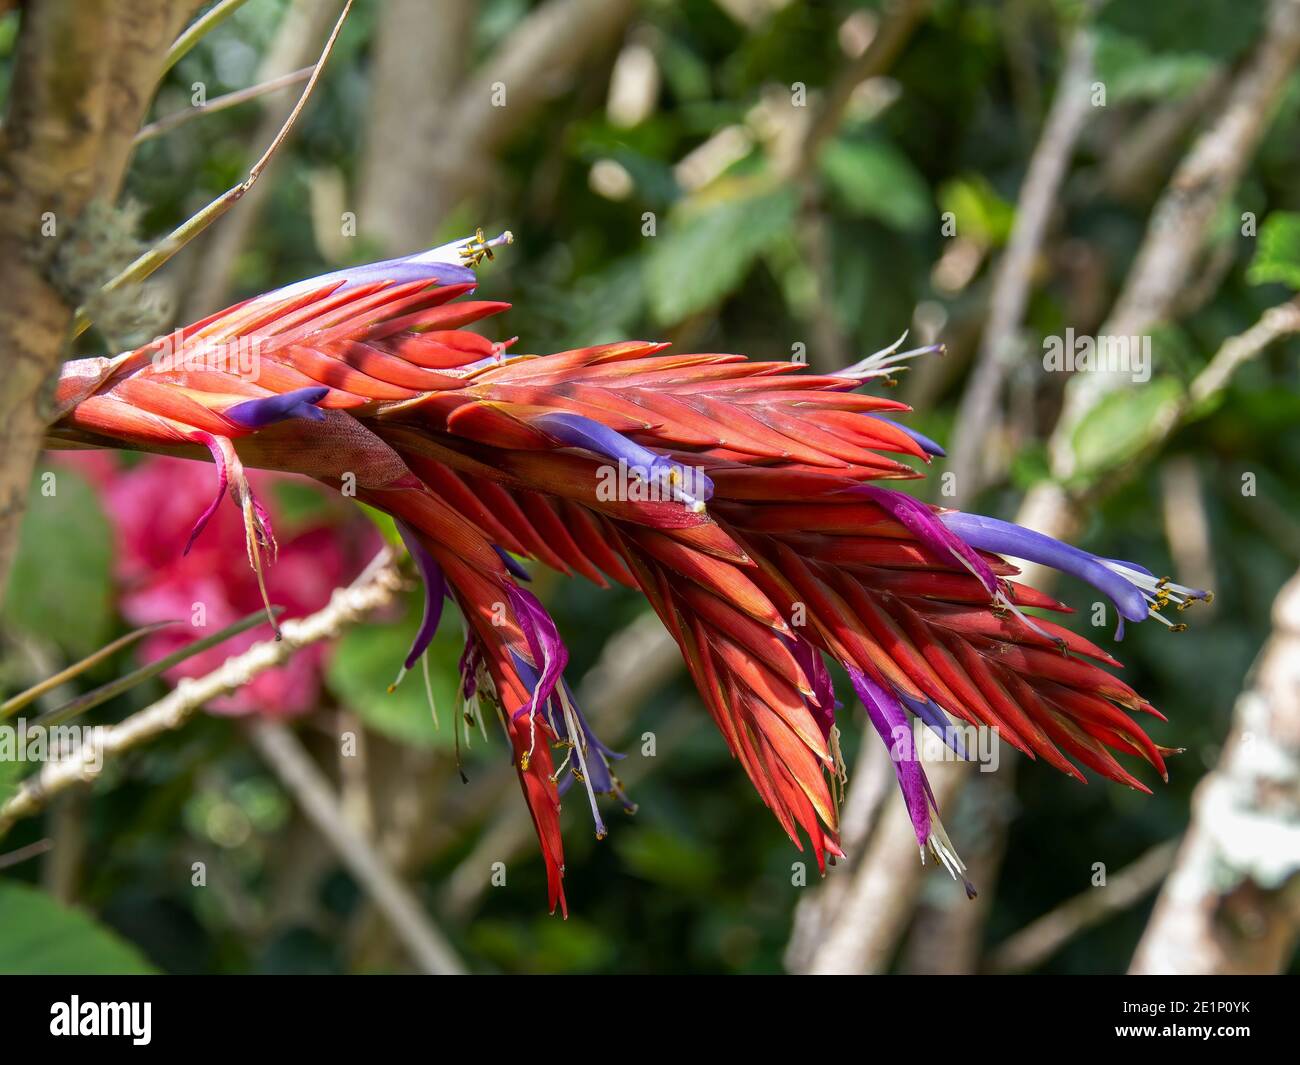 Macro photography of a red tillandsia flower, captured in a garden near the colonial town of Villa de Leyva, in the central Andean mountains of Colomb Stock Photo